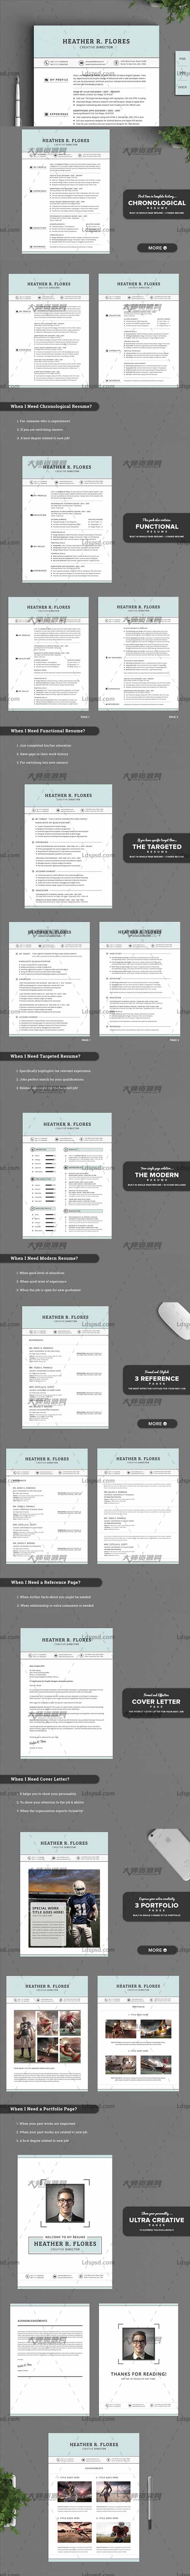 21 in 1 Timeless Resume CV Pack,个人简历模板(INDD/DOCX/PSD)